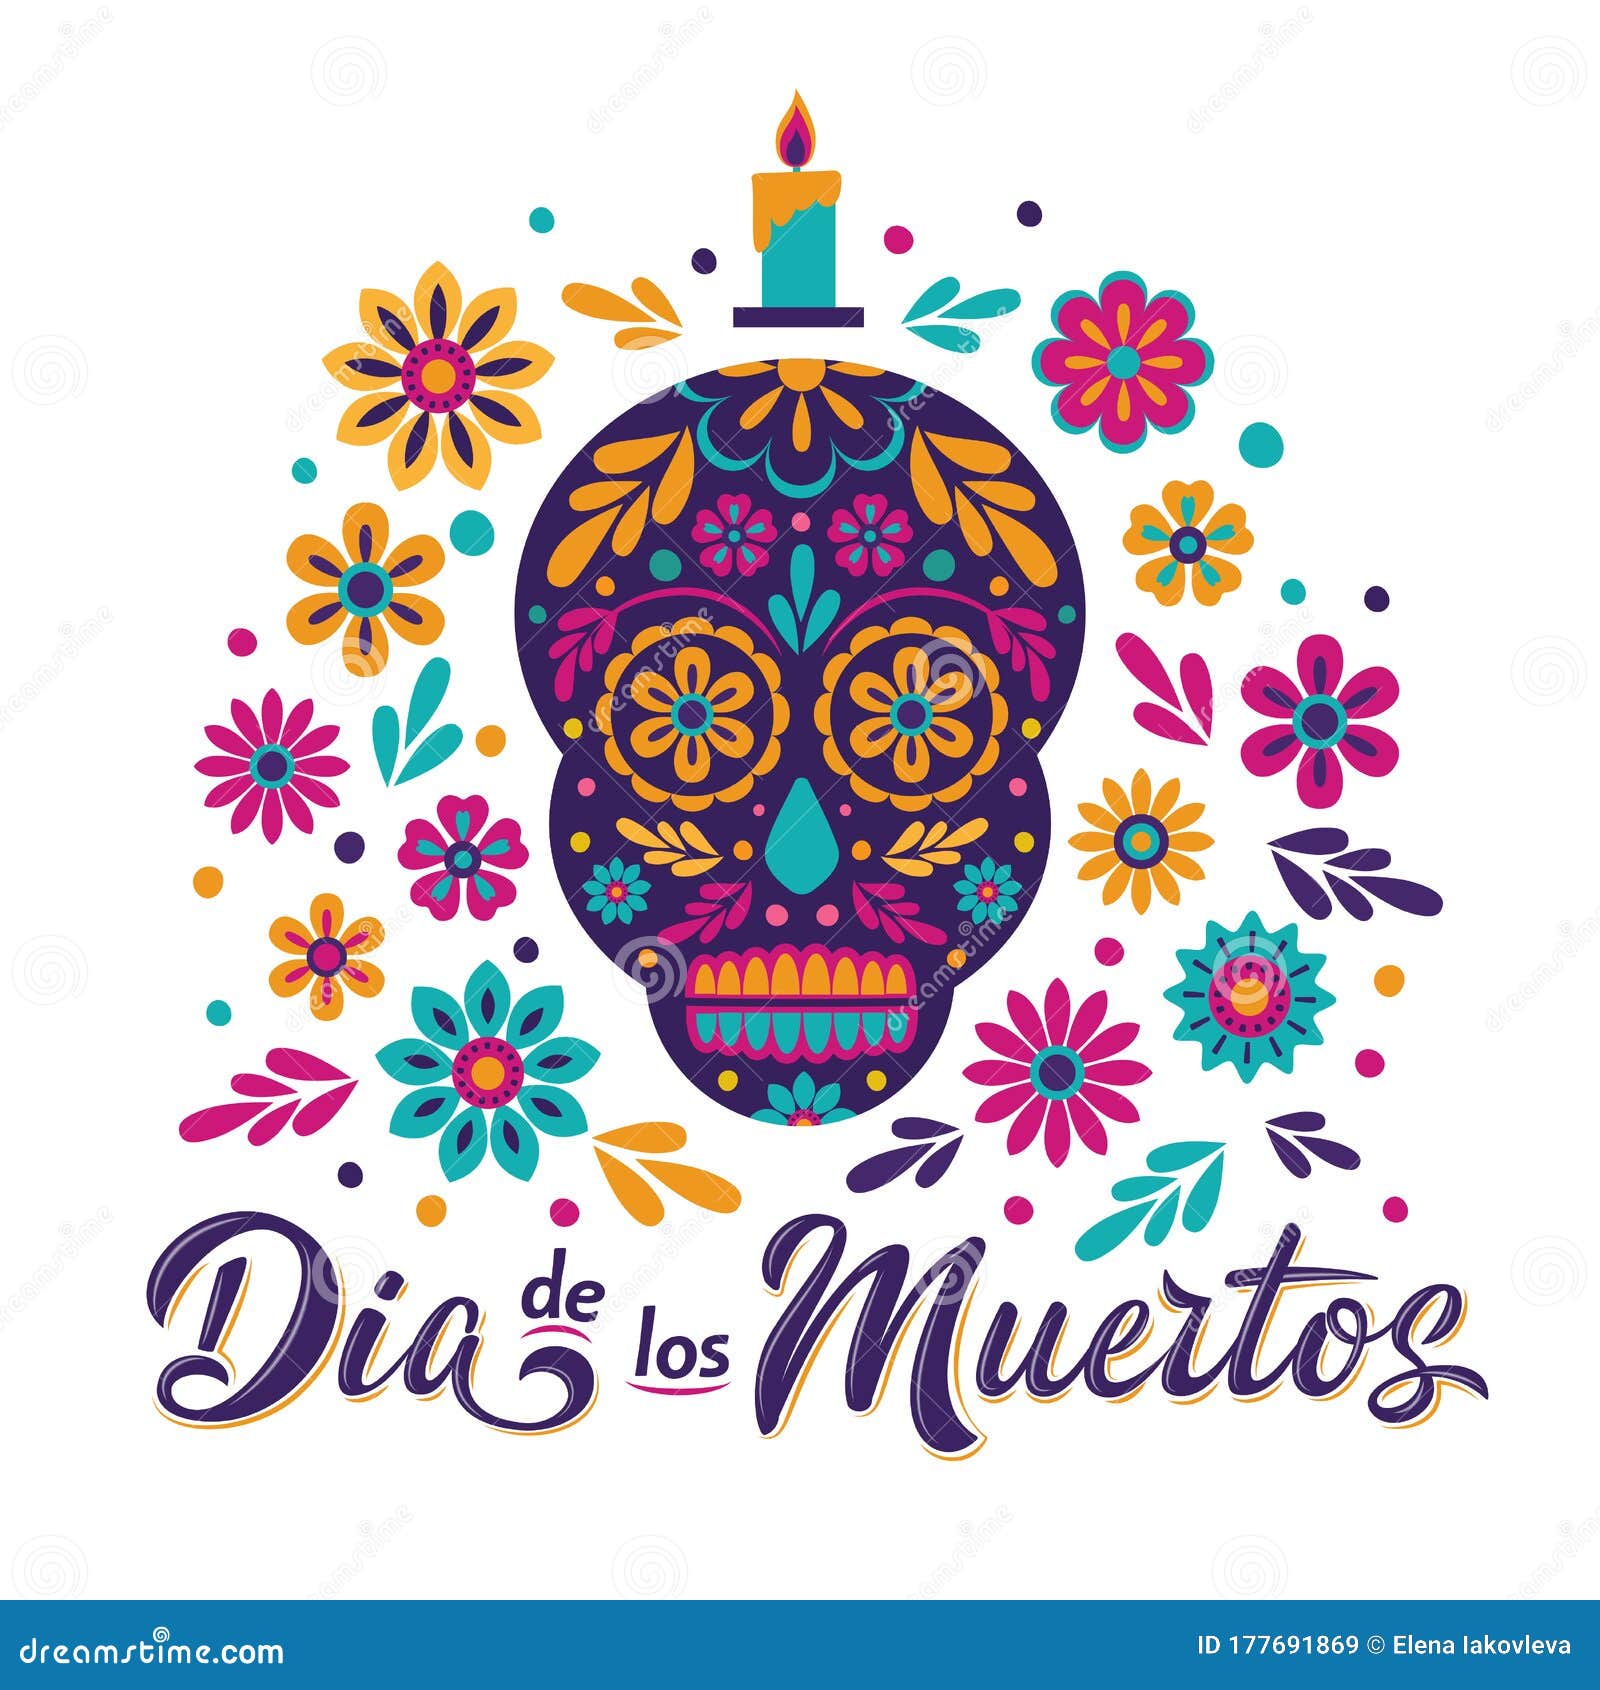 dia de los muertos card with decorated skull, flowers and lettering sign